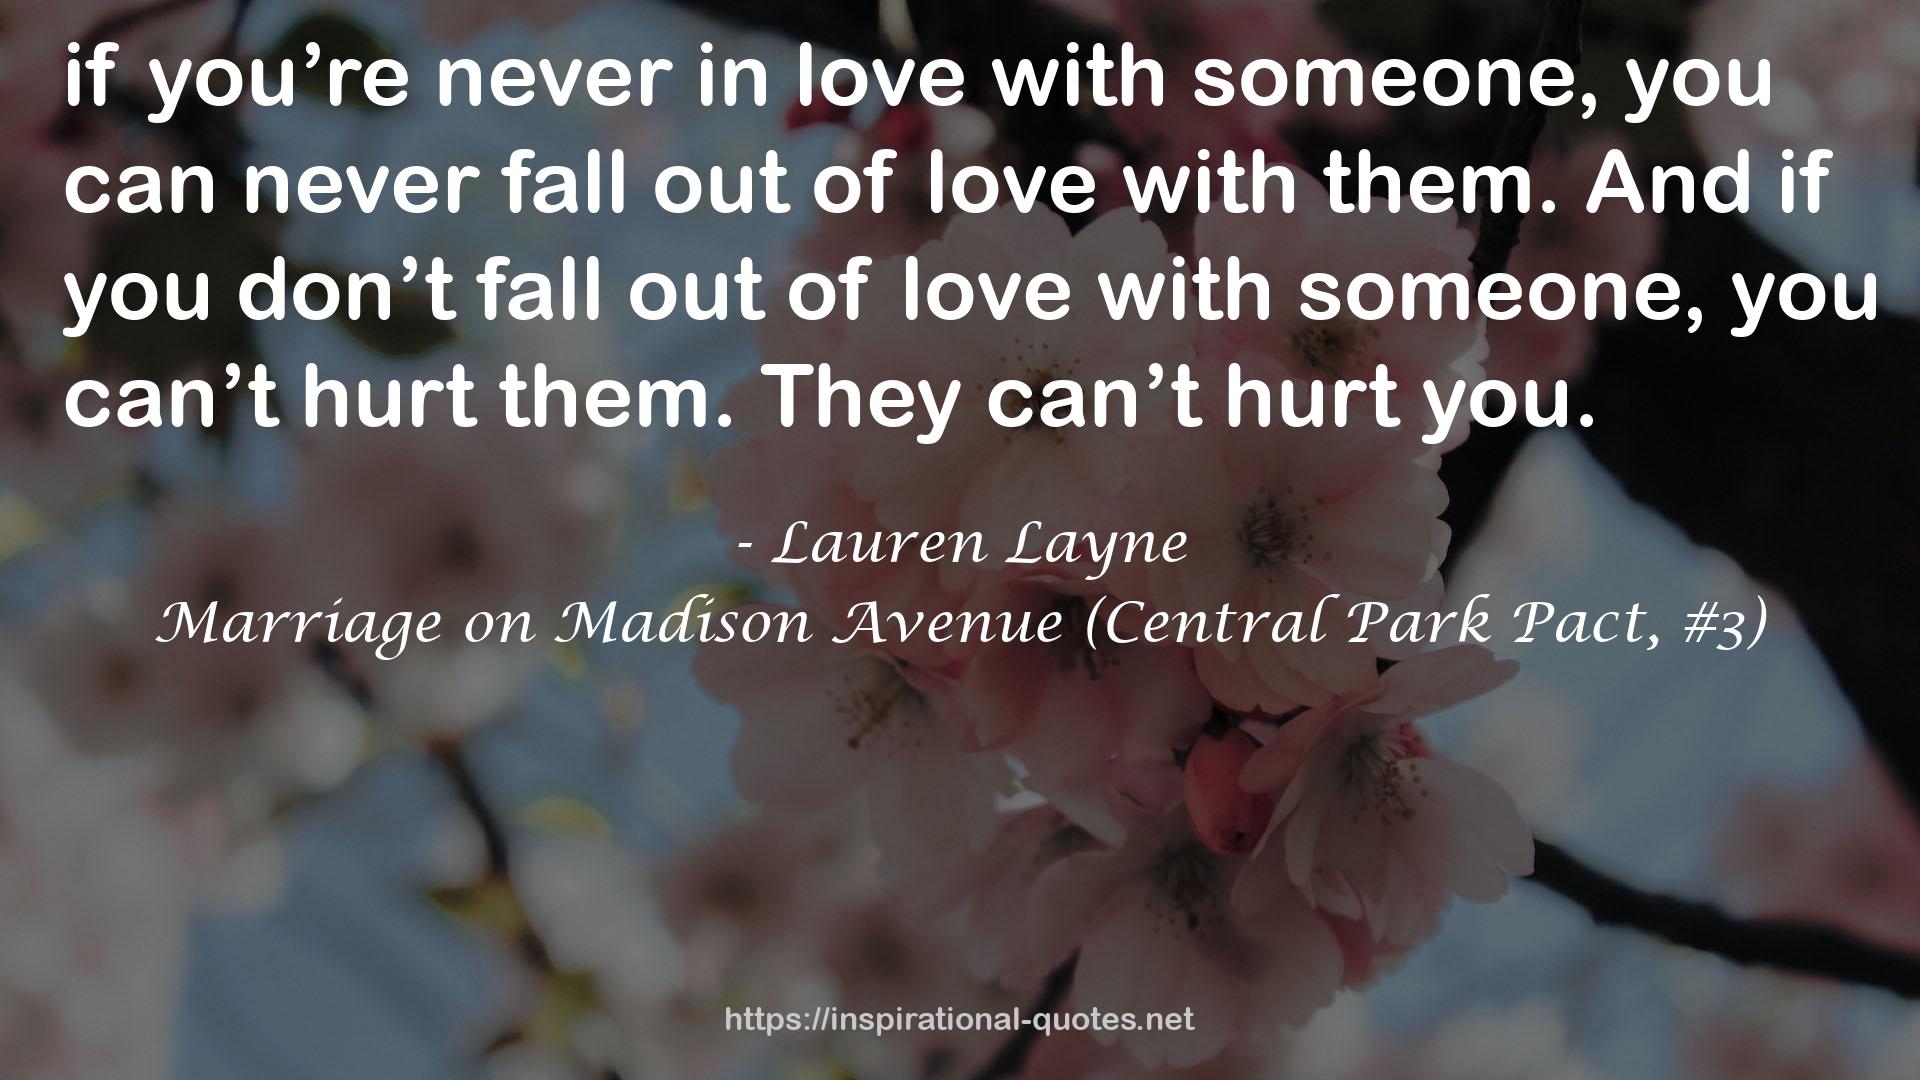 Marriage on Madison Avenue (Central Park Pact, #3) QUOTES